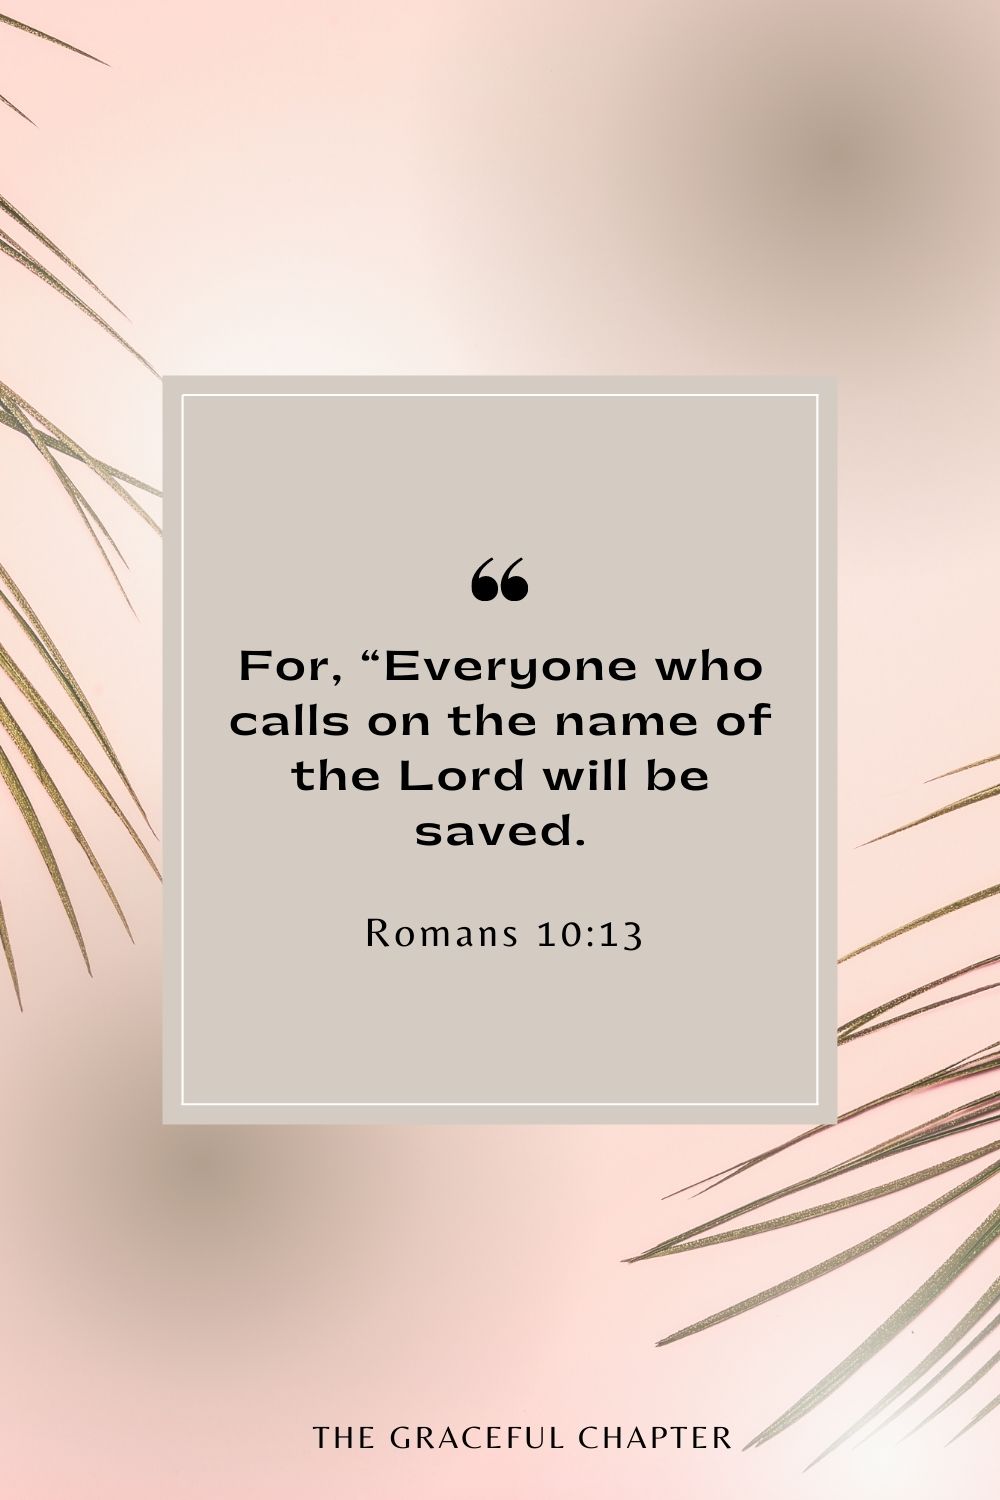 For, “Everyone who calls on the name of the Lord will be saved. Romans 10:13